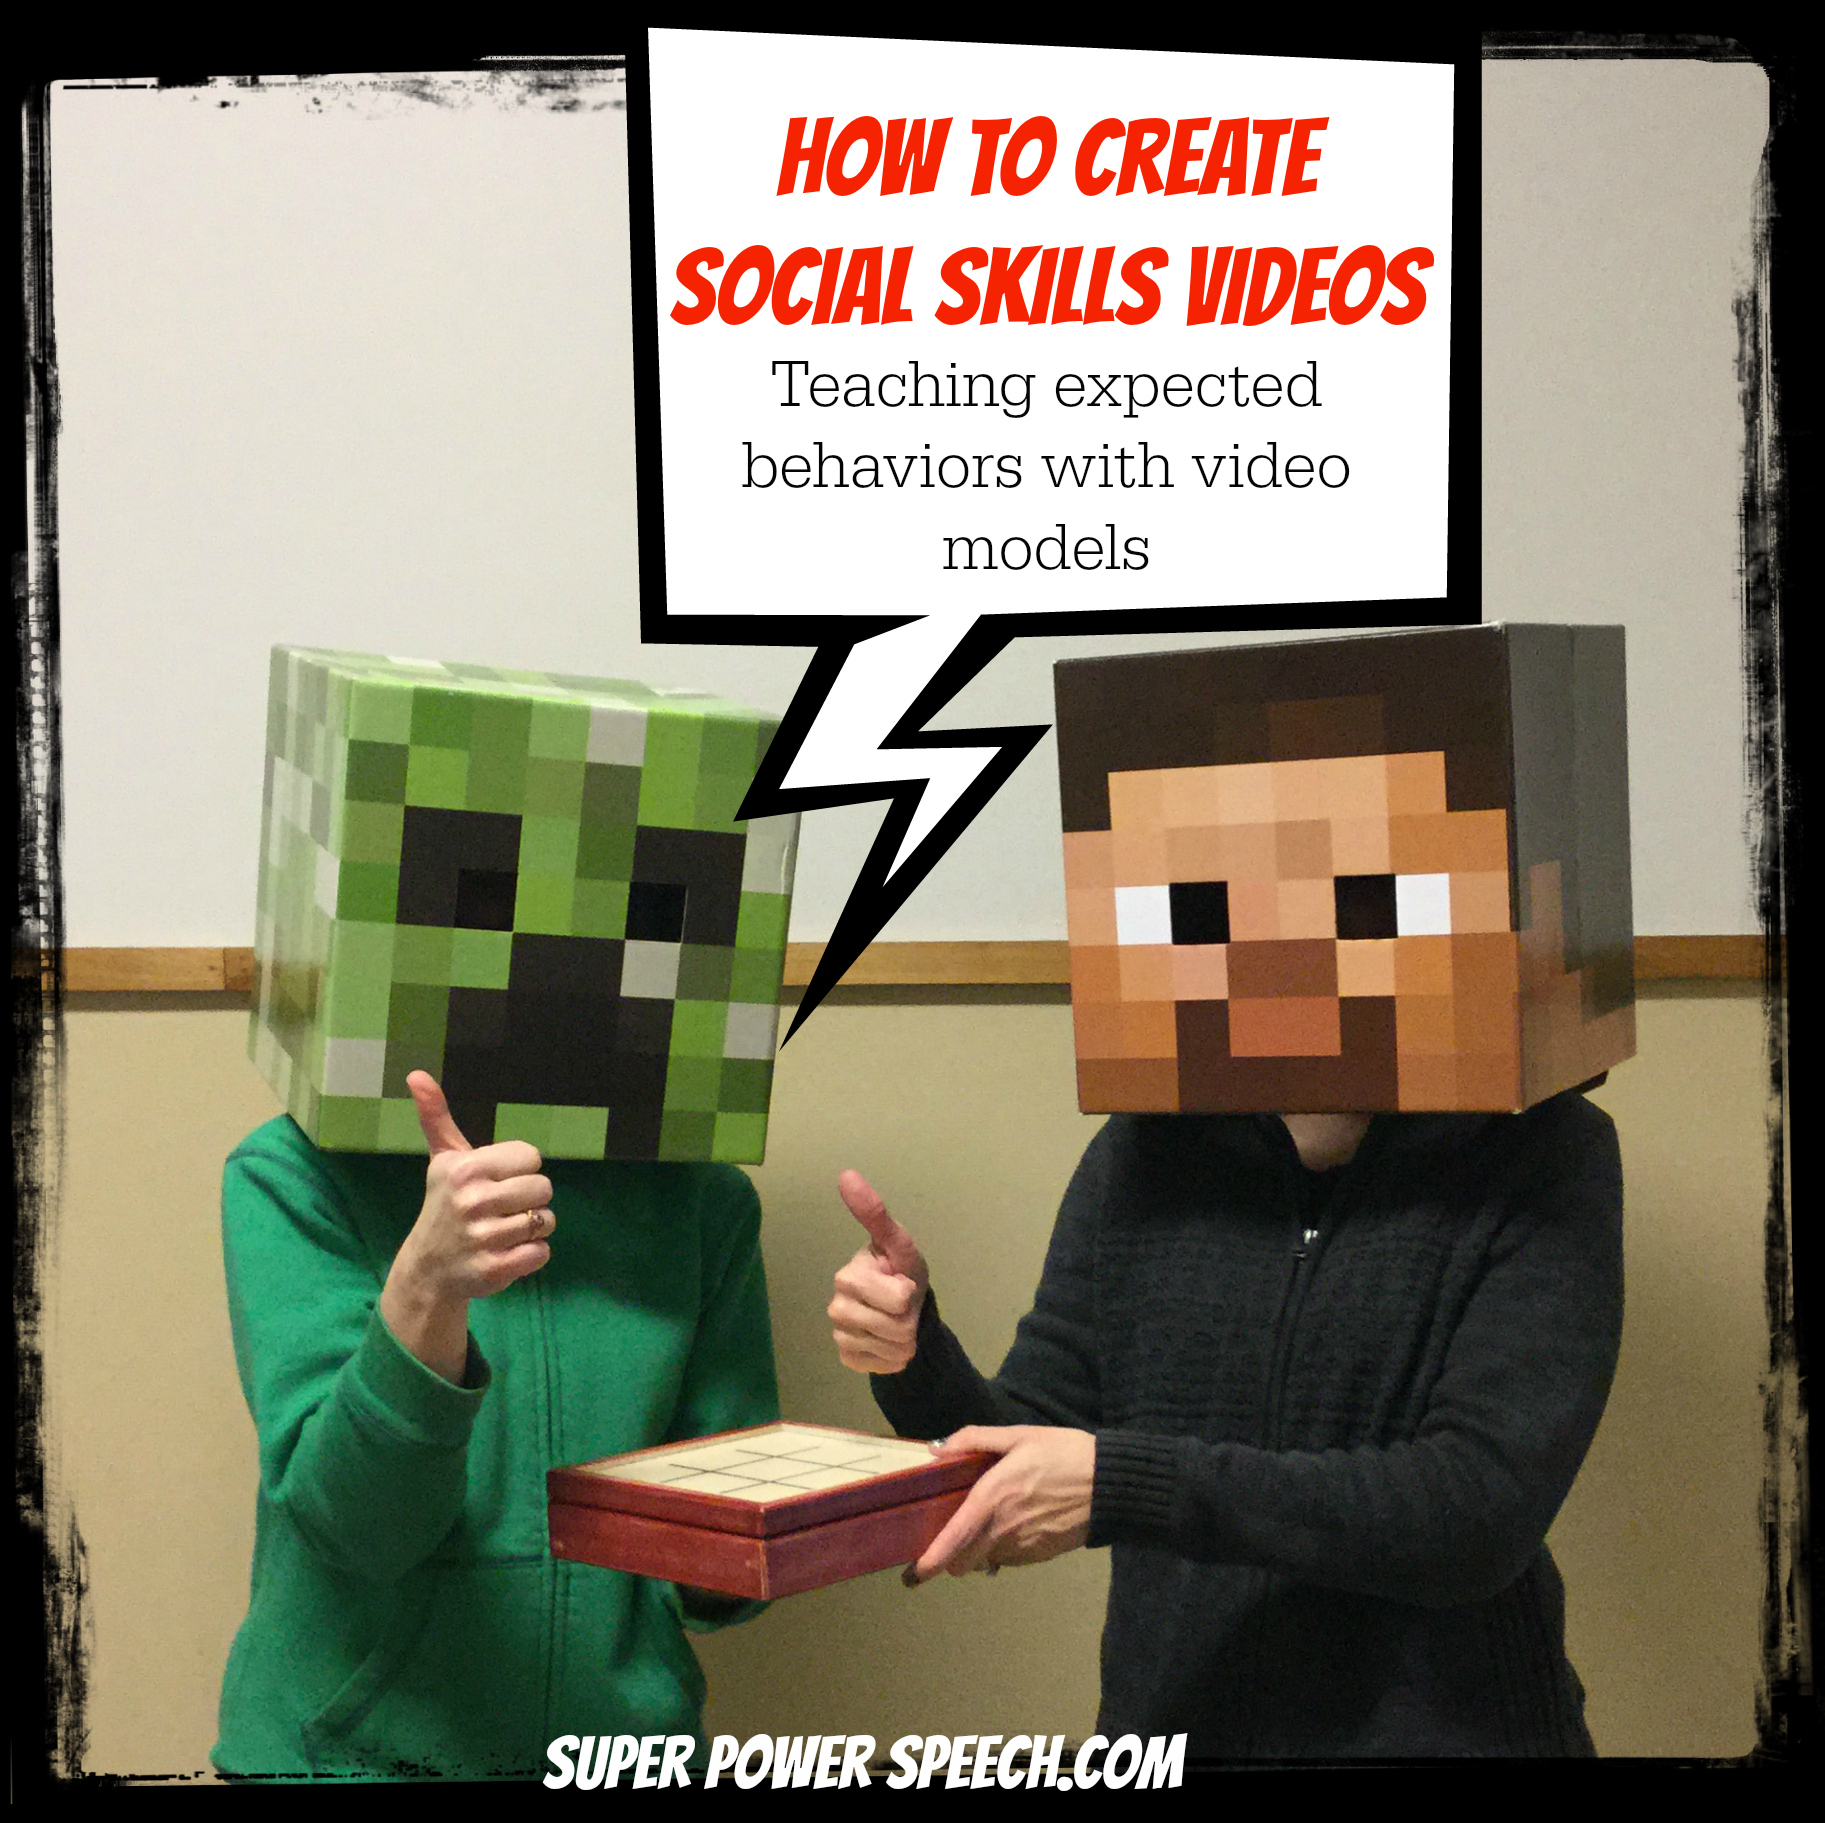 How to Create Social Skills Videos